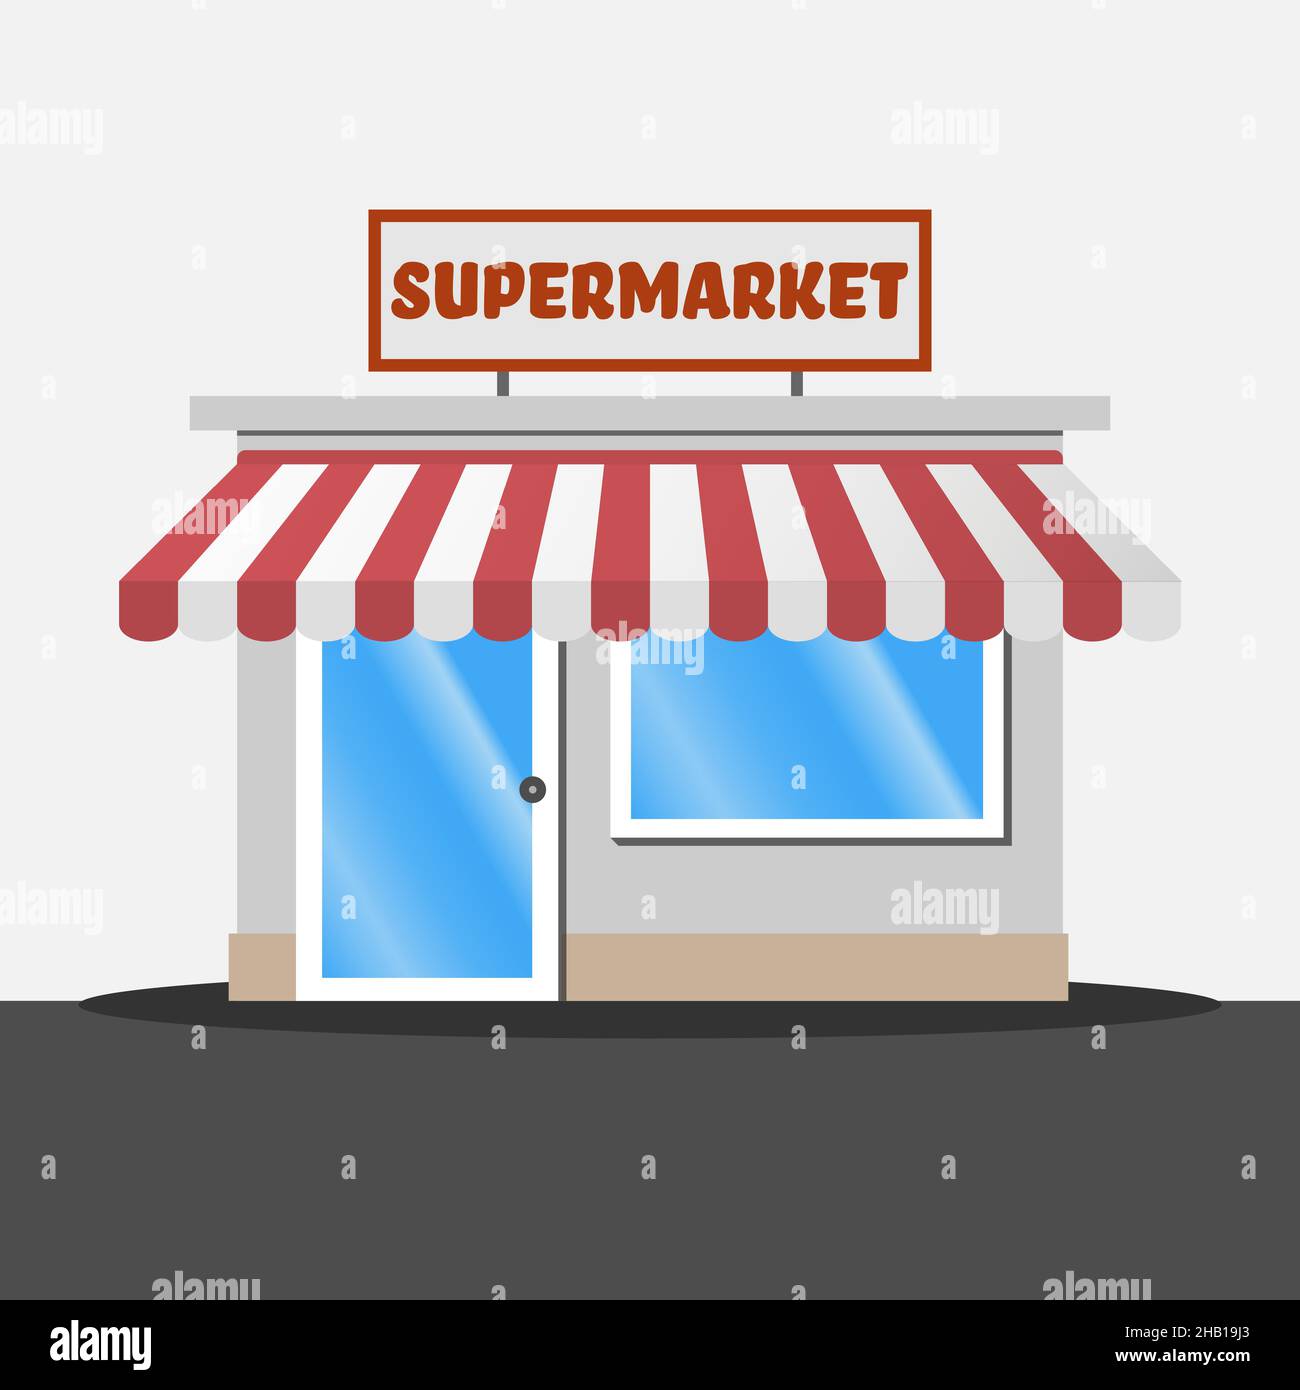 supermarket or grocery store building vector illustration Stock Vector